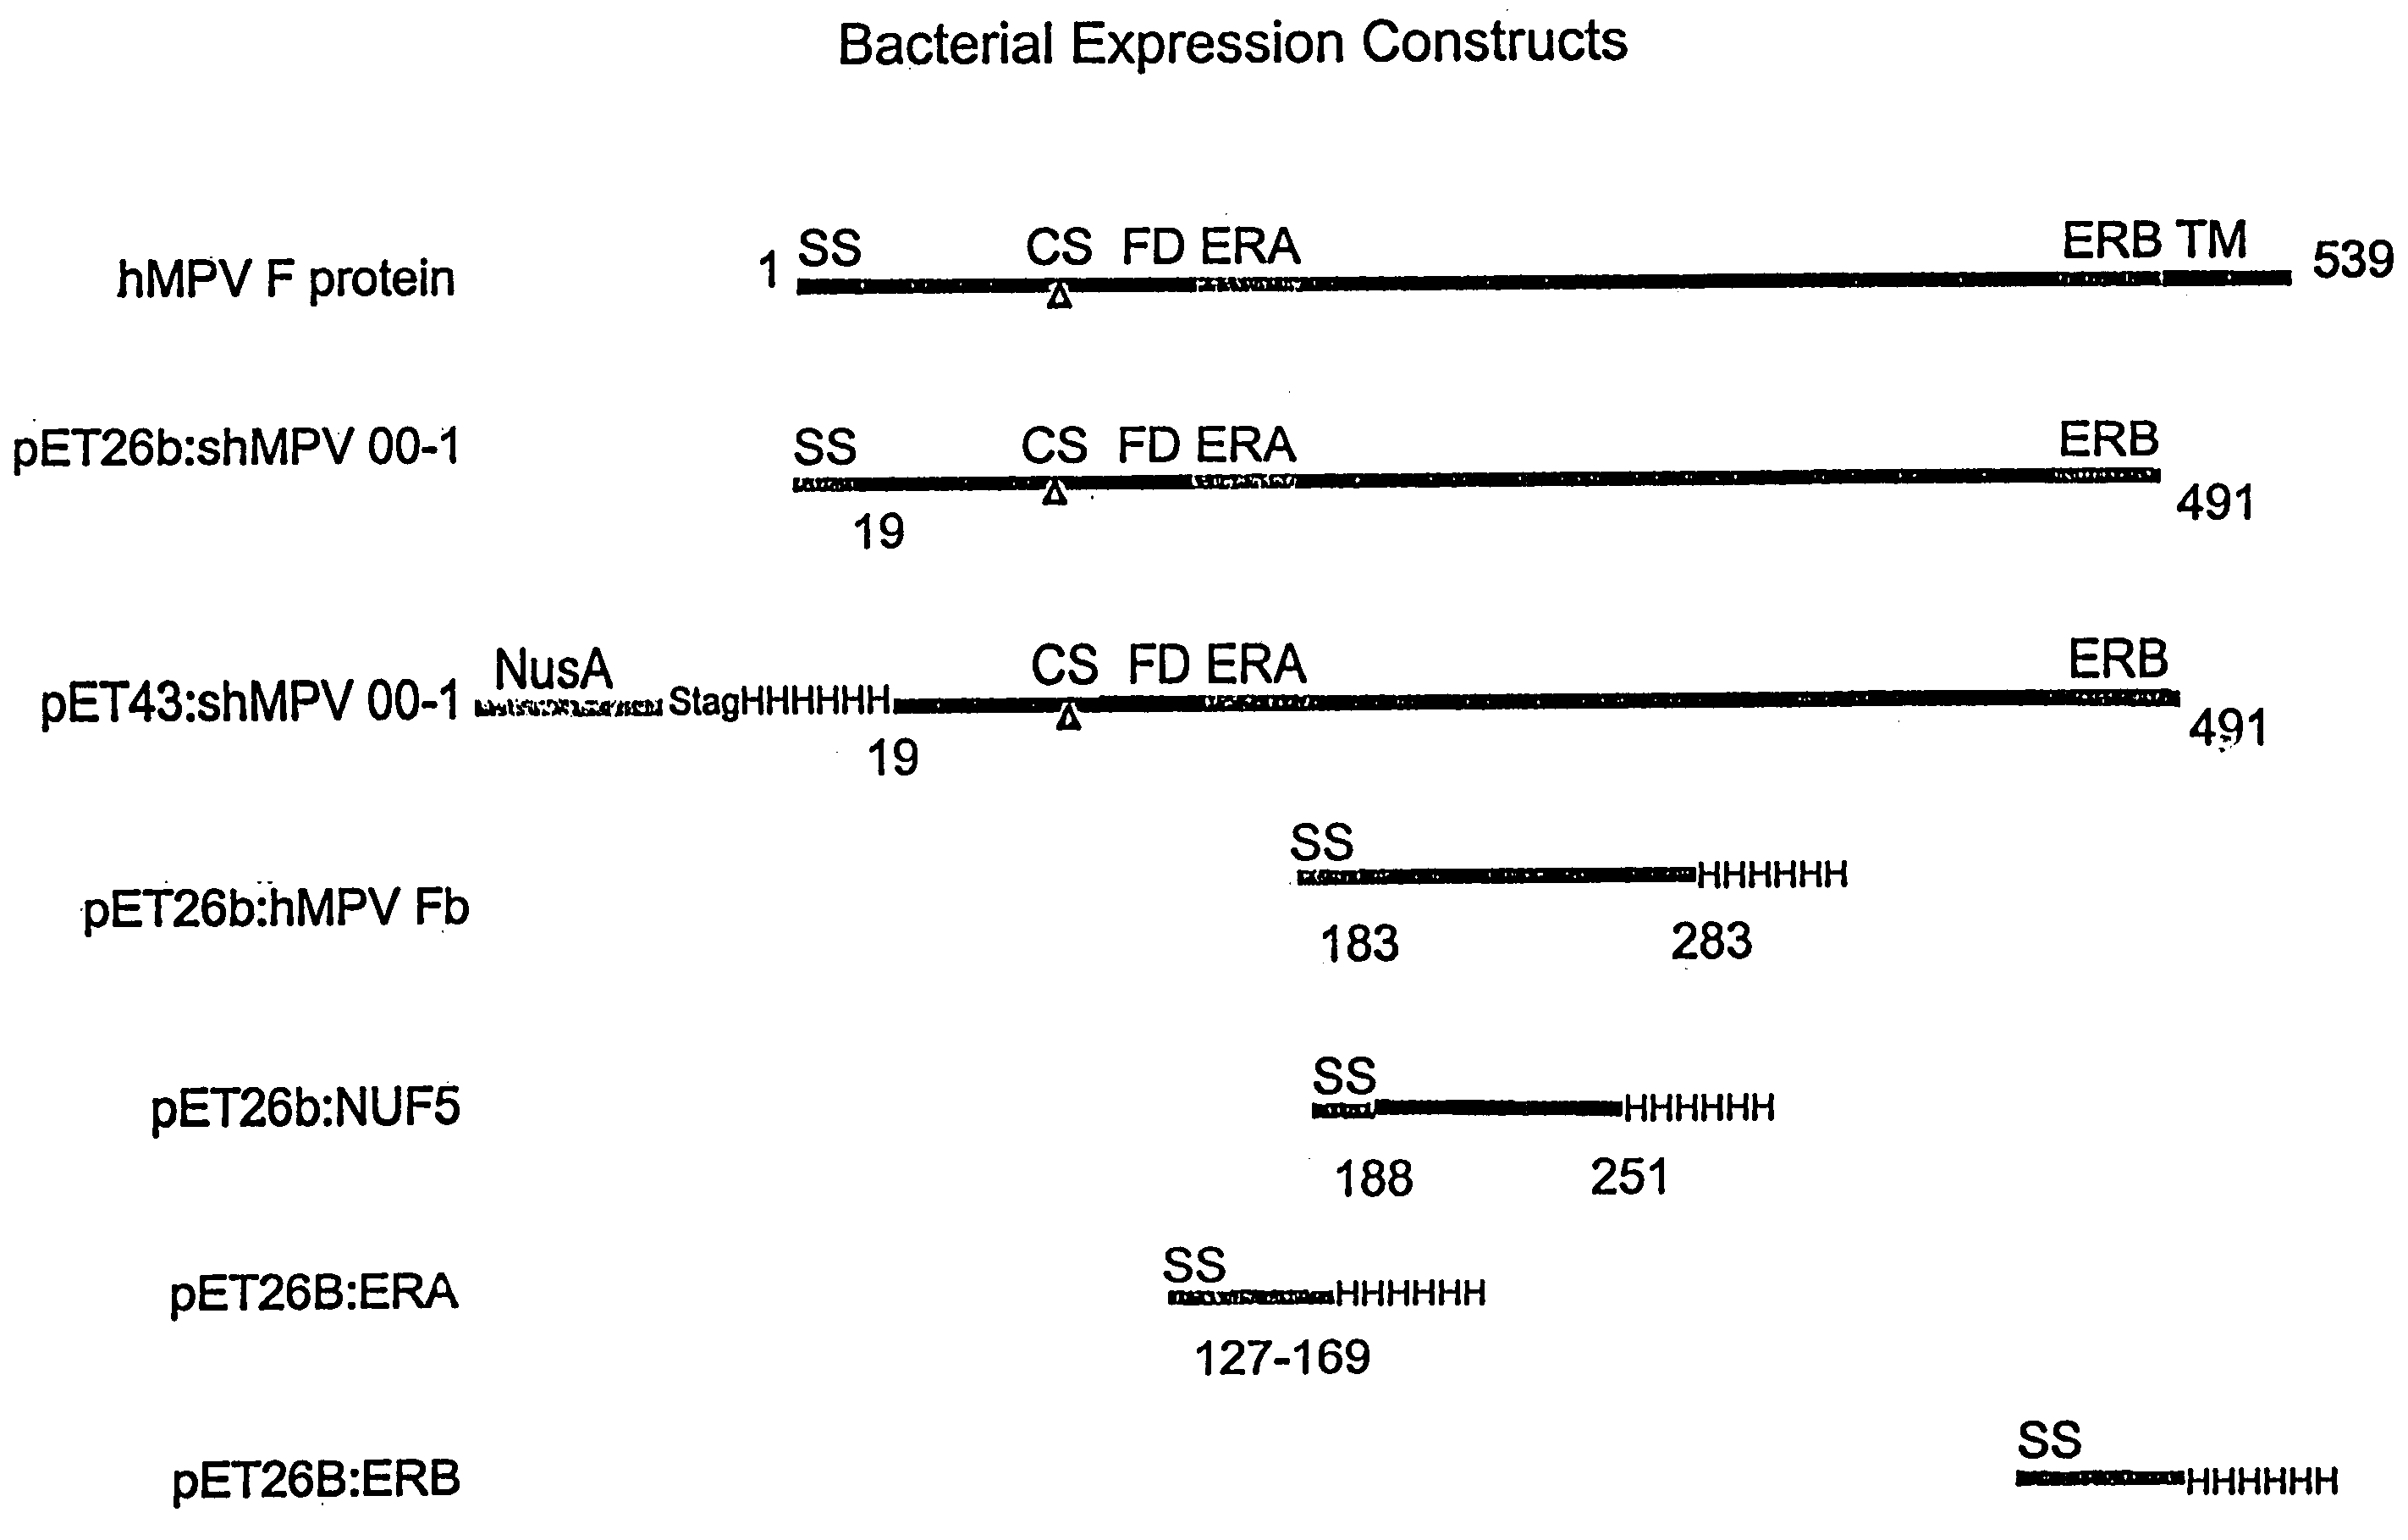 Methods of treating and preventing RSV, hMPV, and PIV using anti-RSV, anti-hMPV, and anti-PIV antibodies